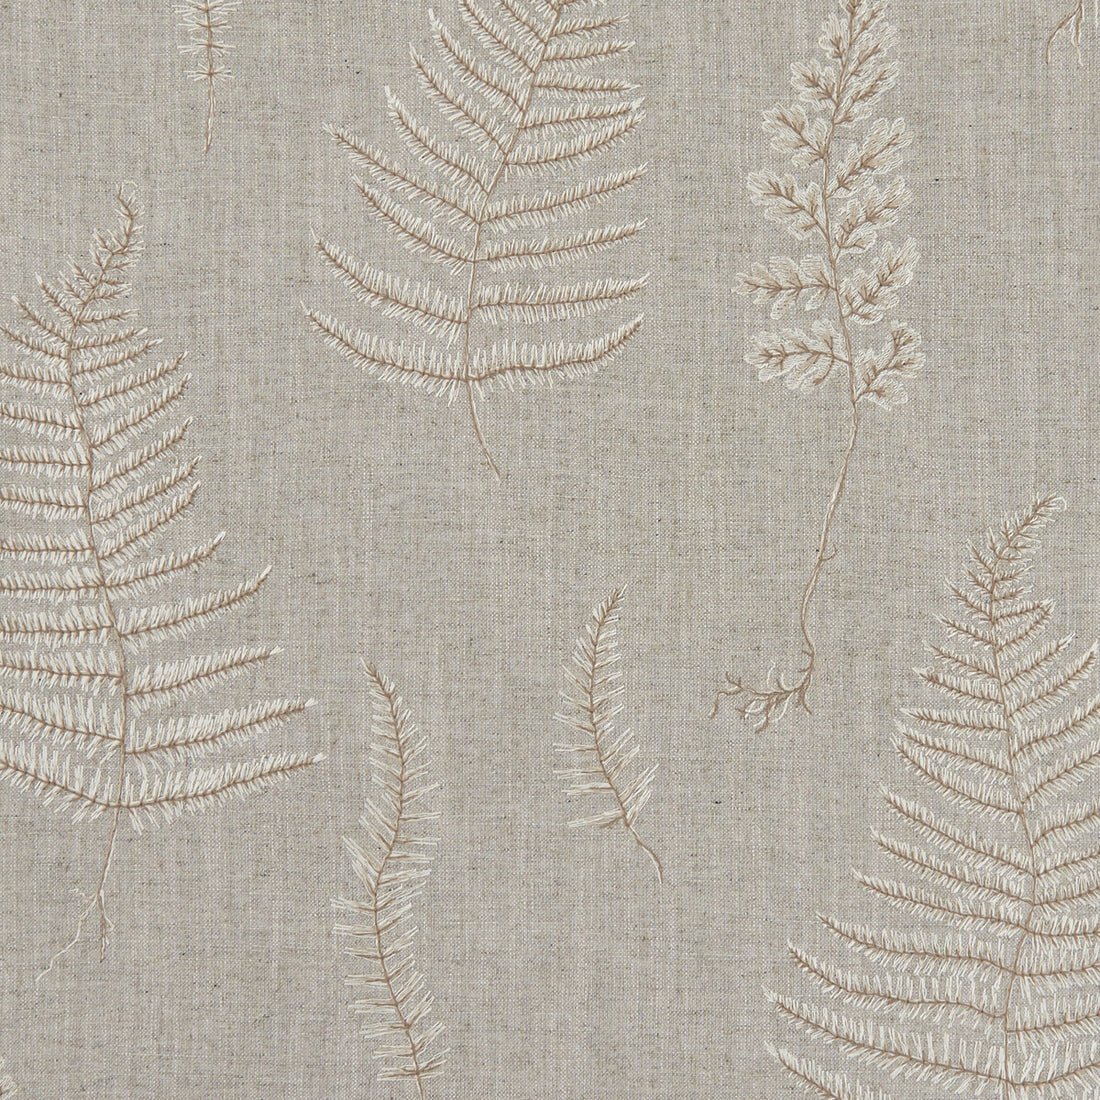 Lorelle fabric in linen/ivory color - pattern F1092/02.CAC.0 - by Clarke And Clarke in the Clarke &amp; Clarke Botanica collection